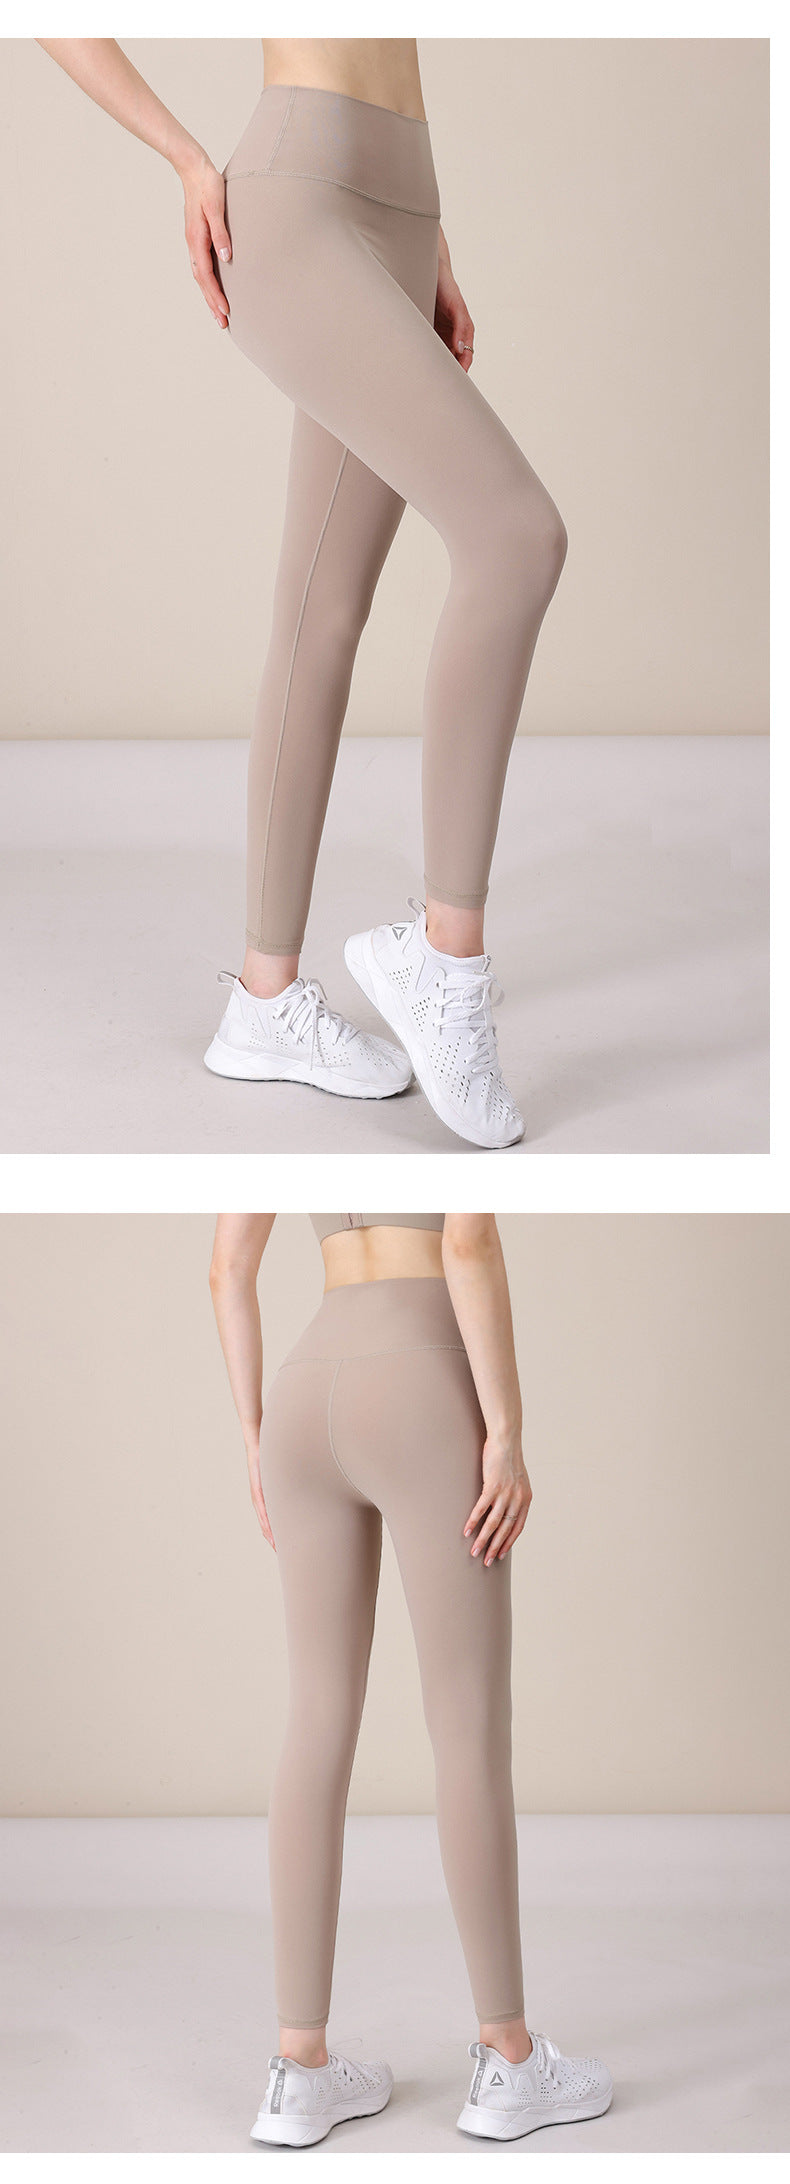 2023.09 New non-size yoga leggings high waist hip lifting abdomen seamless track pants fitness running nude tight cropped pants